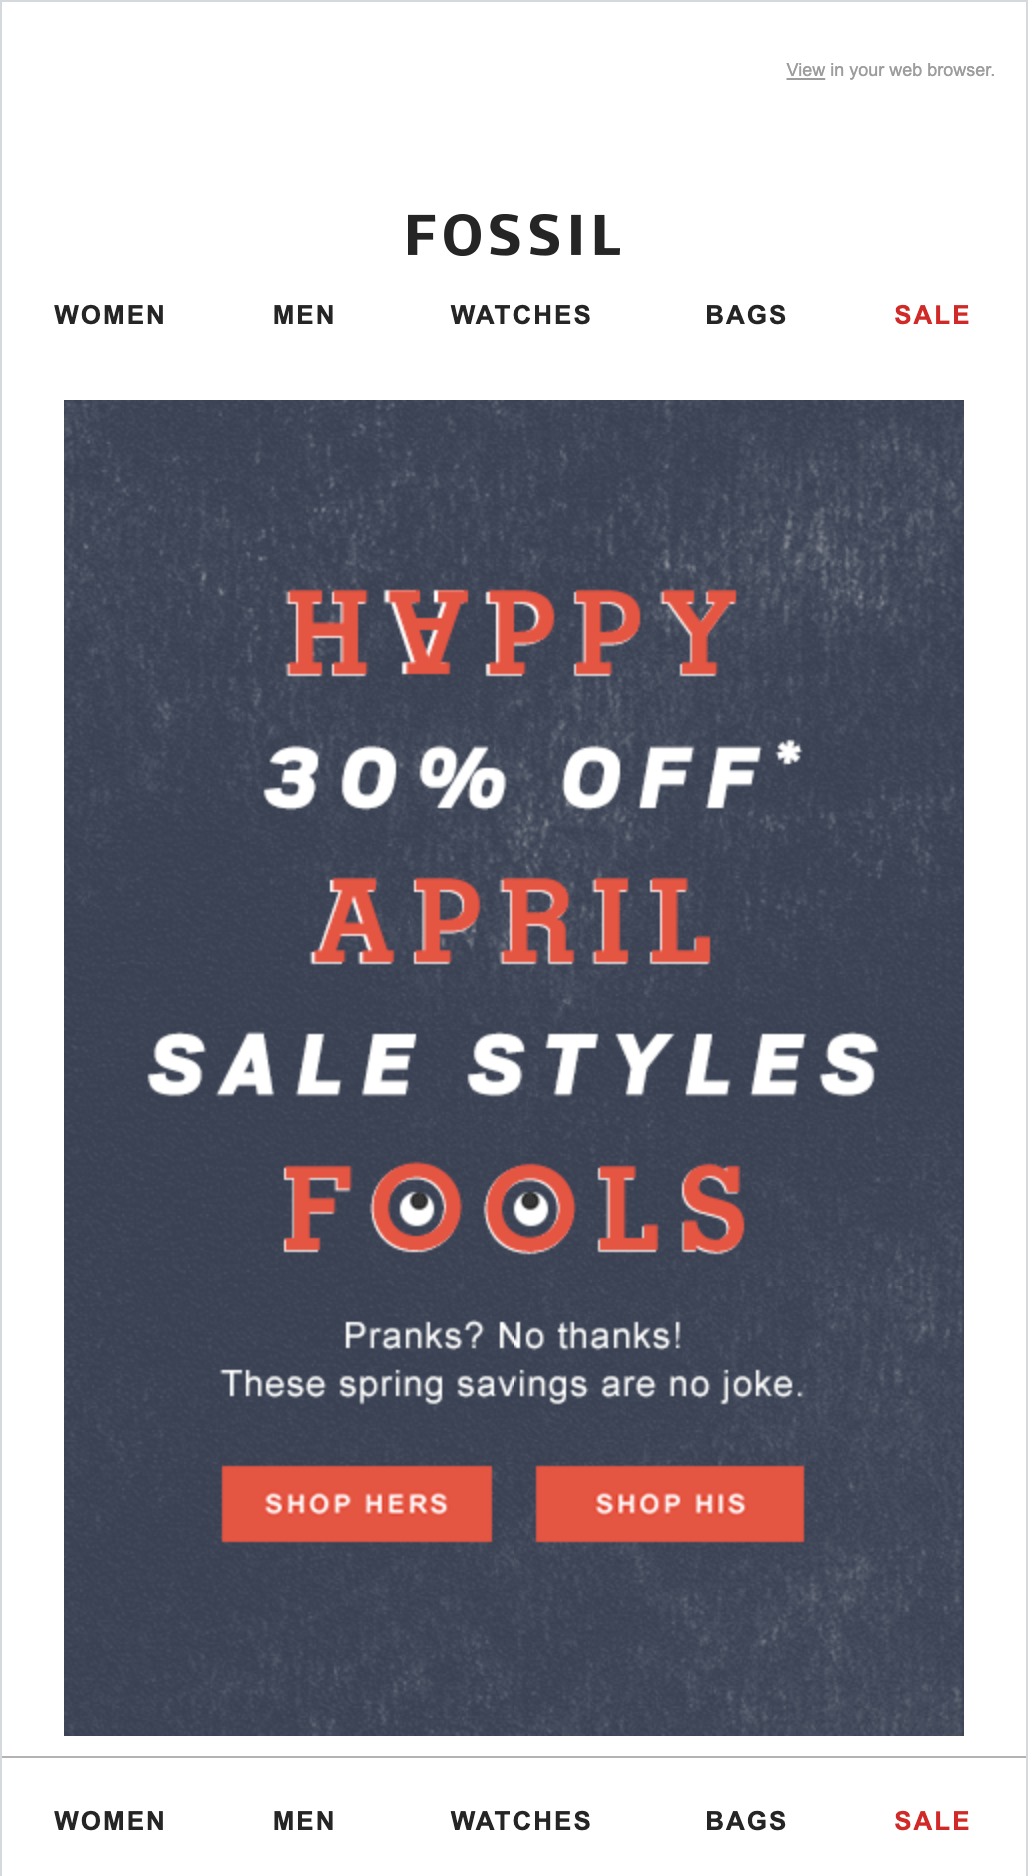 April Fools’ Email Example by Fossil